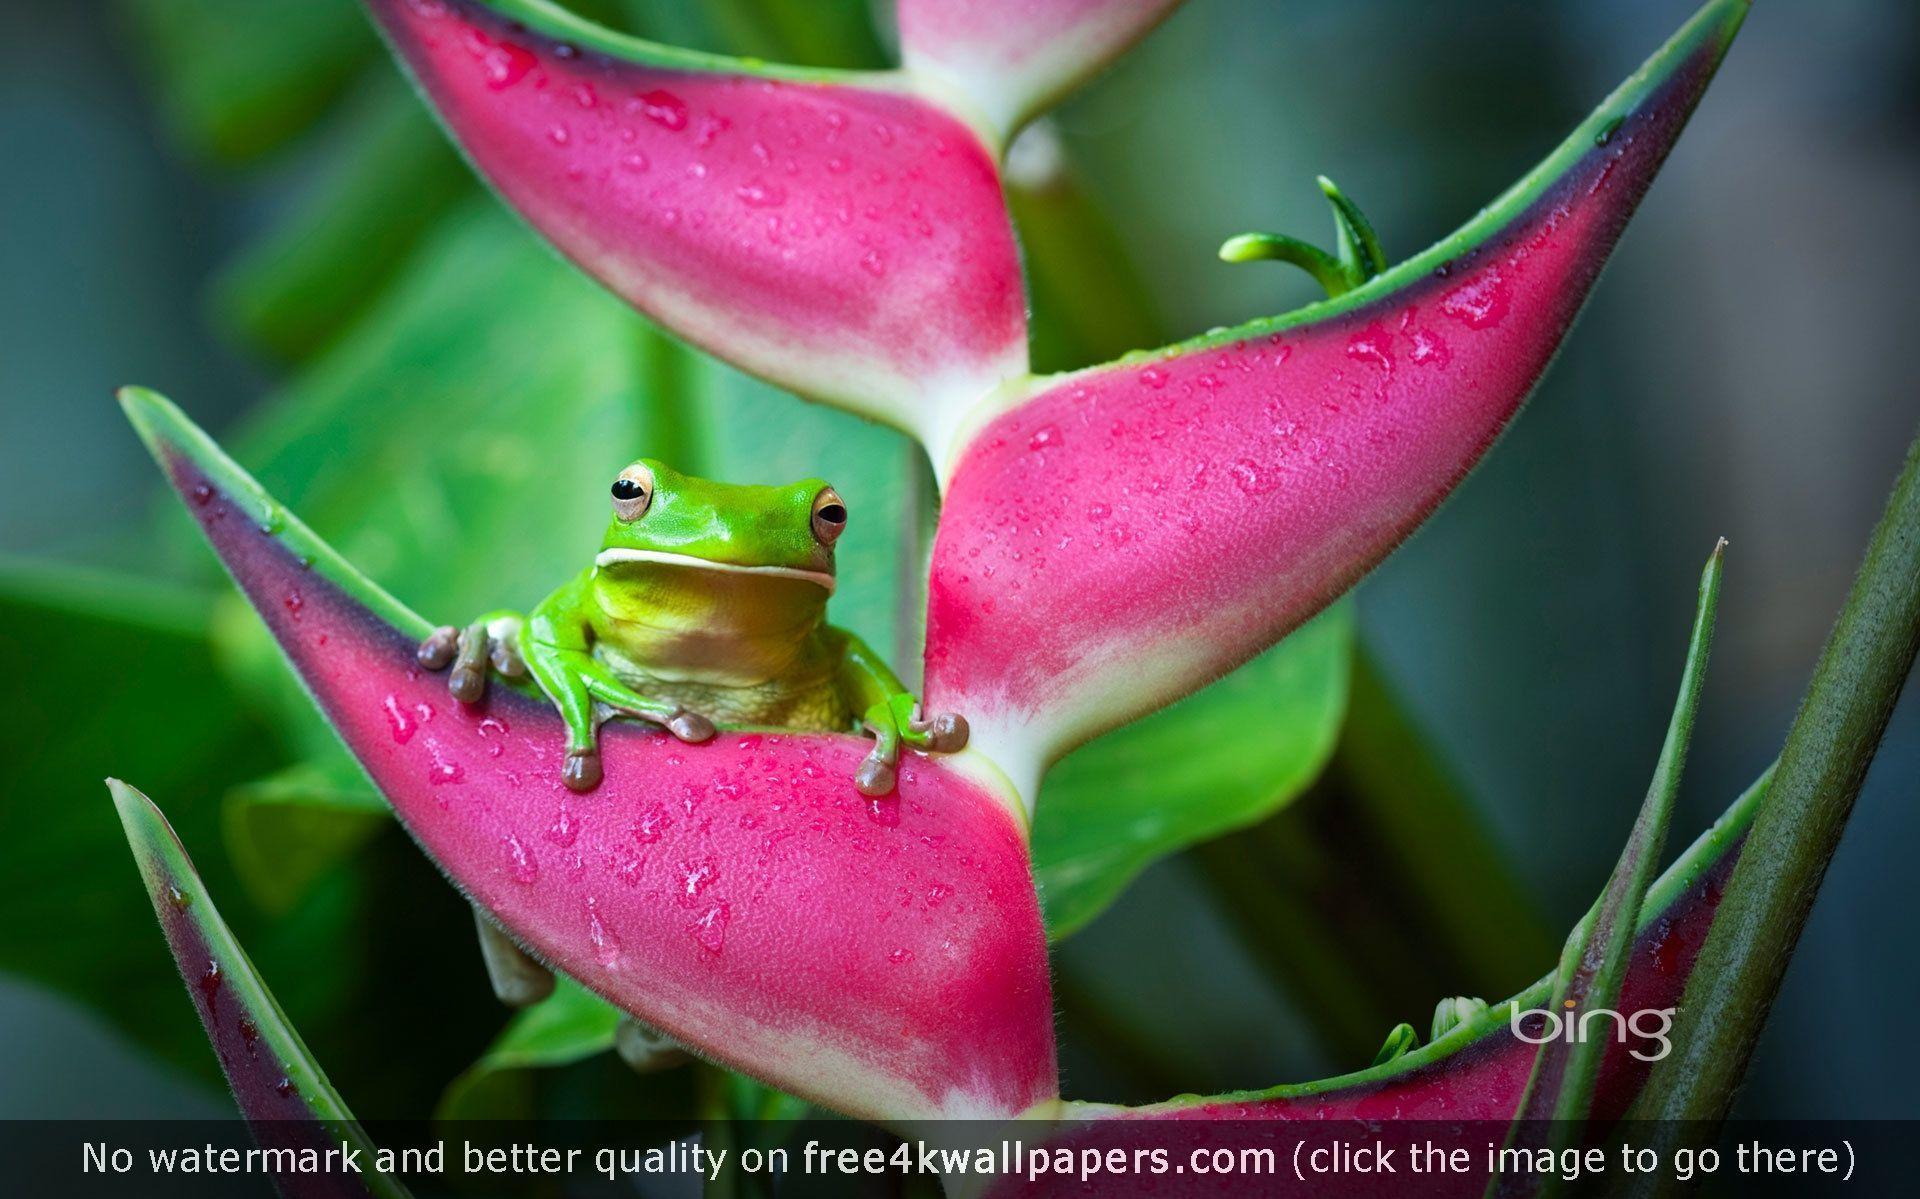 Frog 4K wallpapers for your desktop or mobile screen free and easy